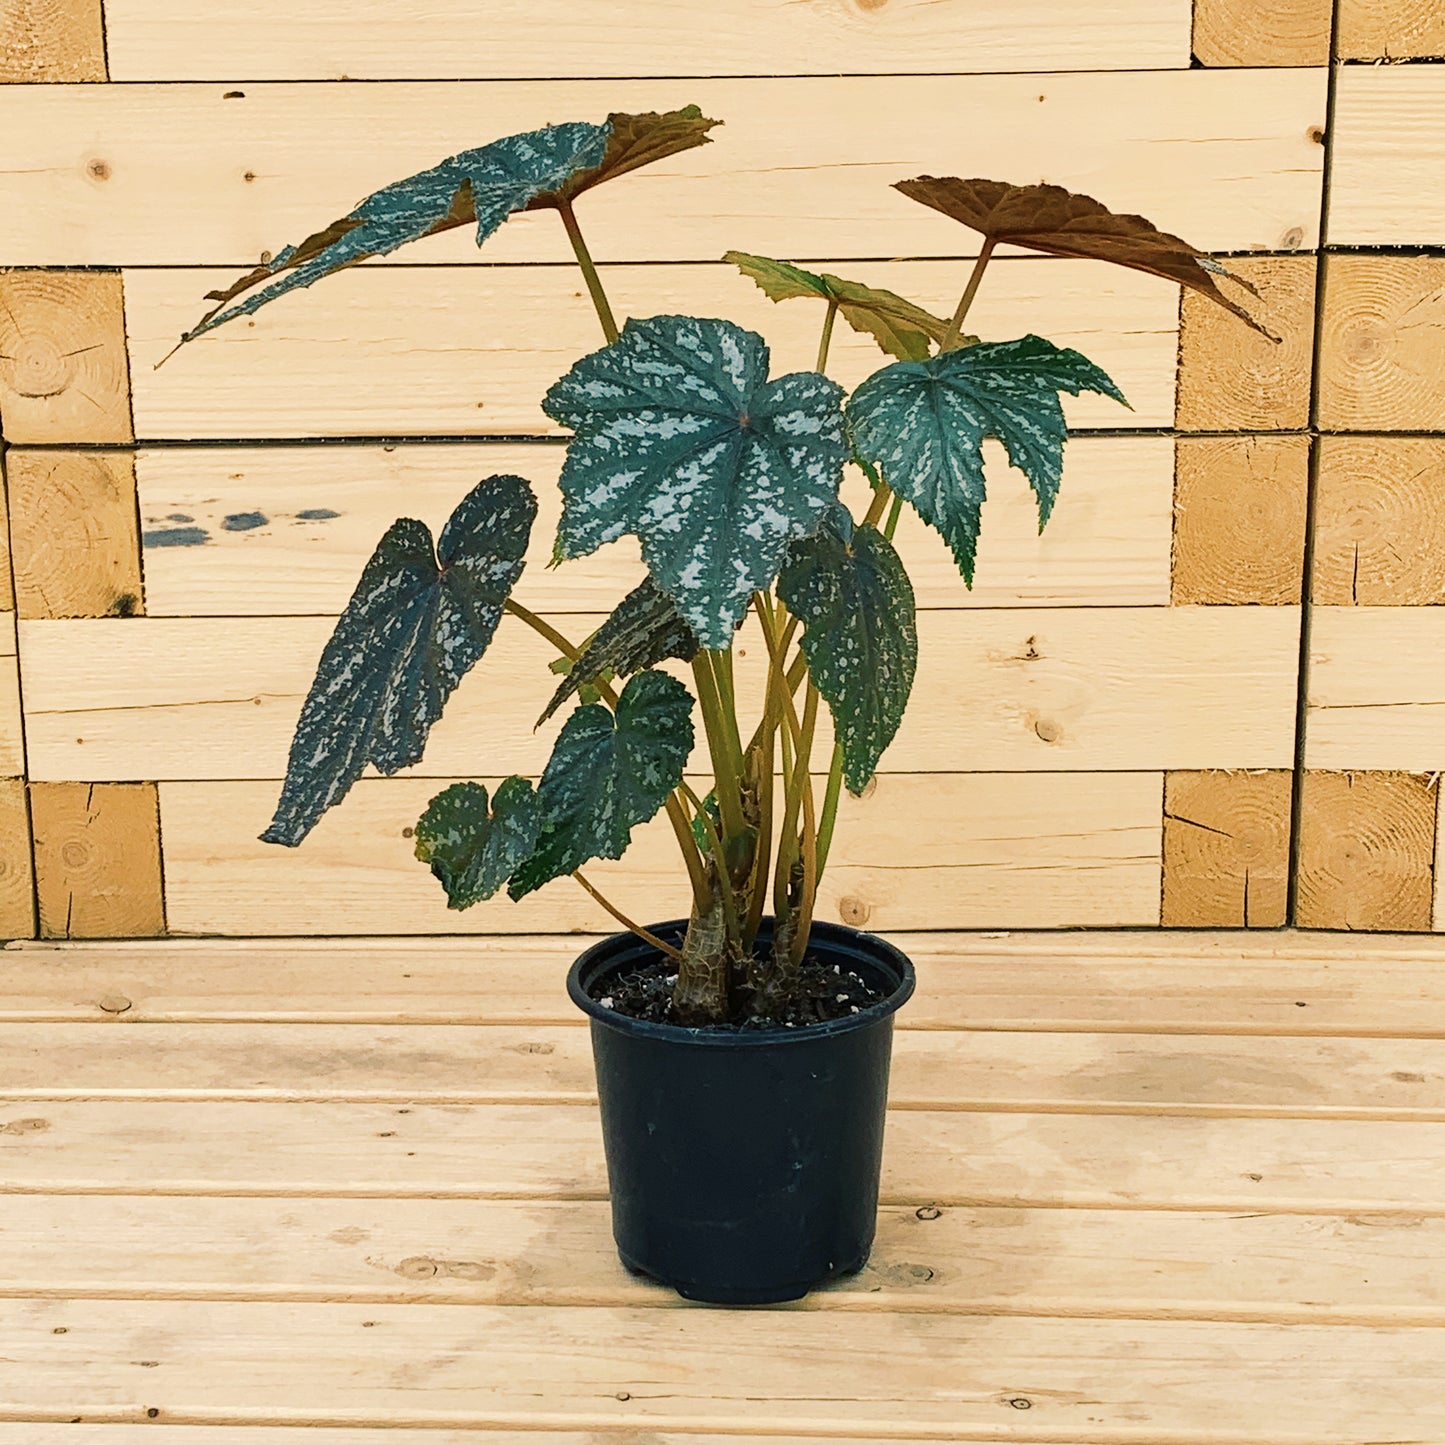 Cane Begonia (Begonia) in a 4 inch pot. Indoor plant for sale by Promise Supply for delivery and pickup in Toronto